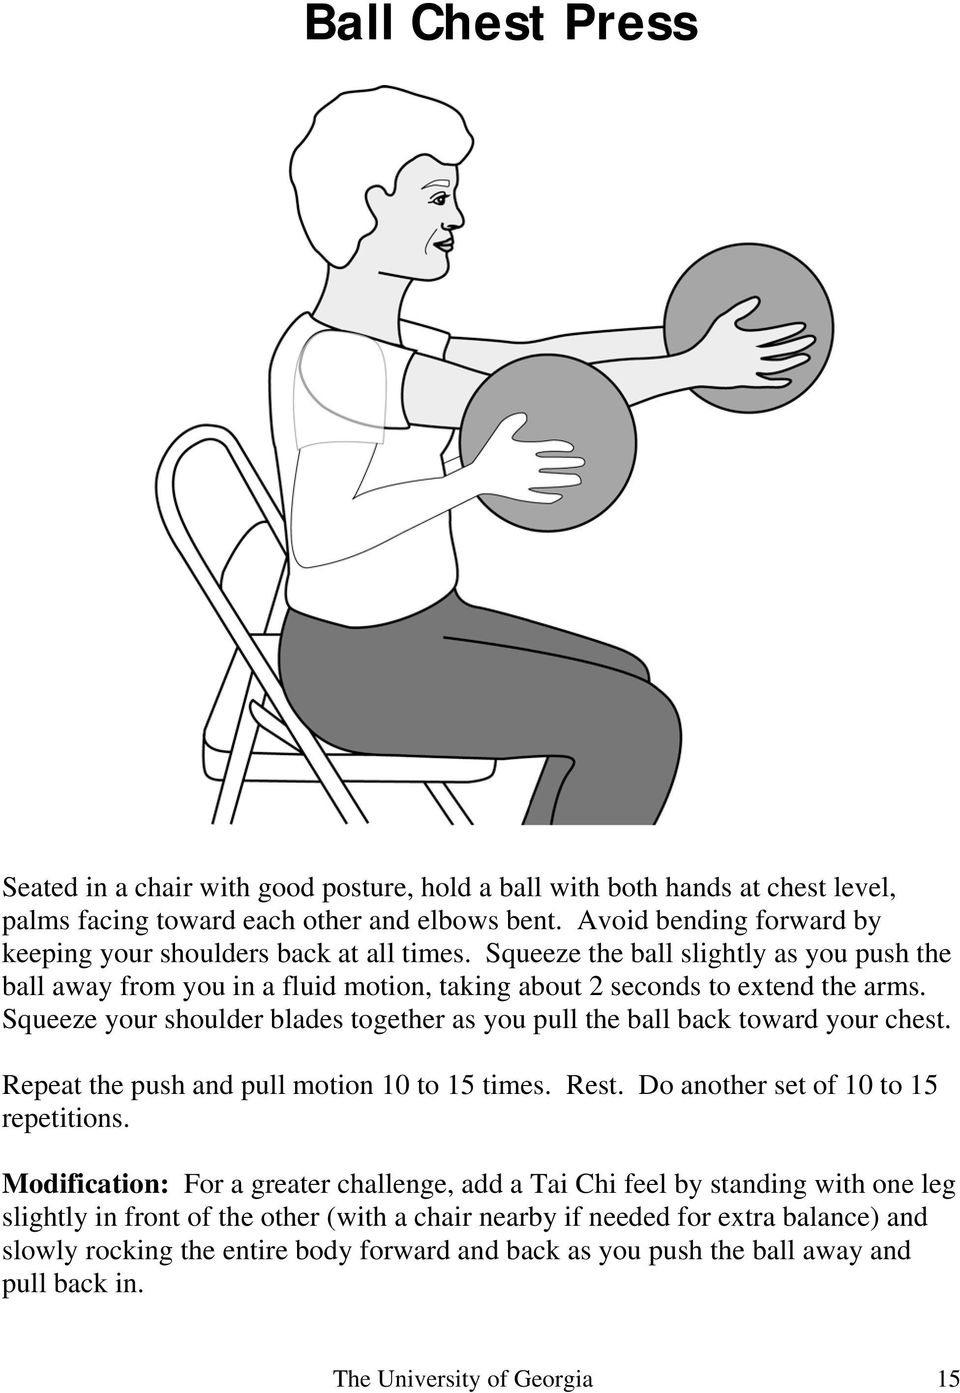 Squeeze your shoulder blades together as you pull the ball back toward your chest. Repeat the push and pull motion 10 to 15 times. Rest. Do another set of 10 to 15 repetitions.